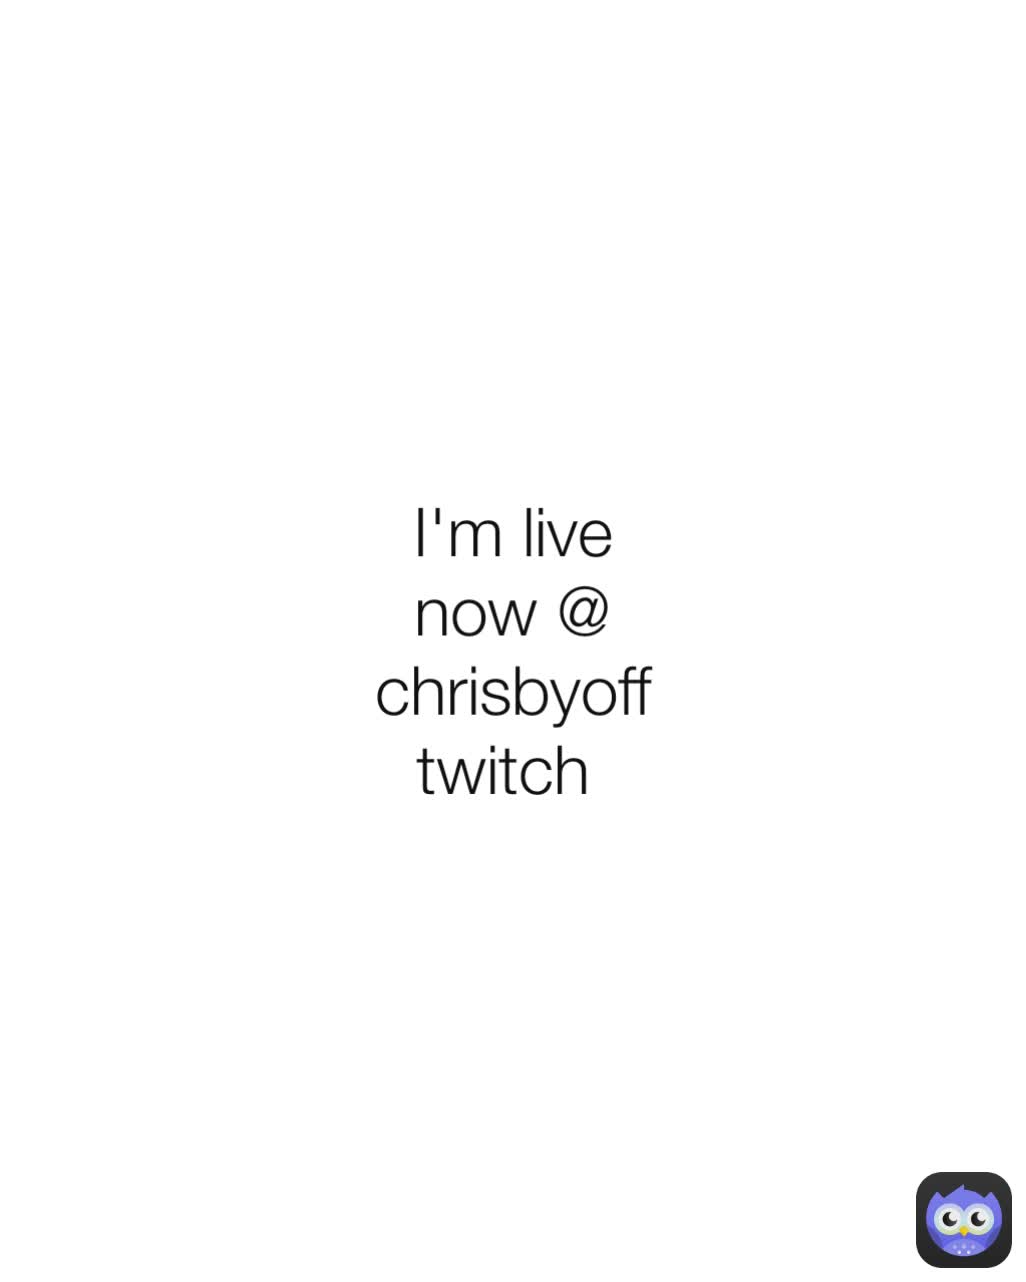 I'm live now @ chrisbyoff twitch 